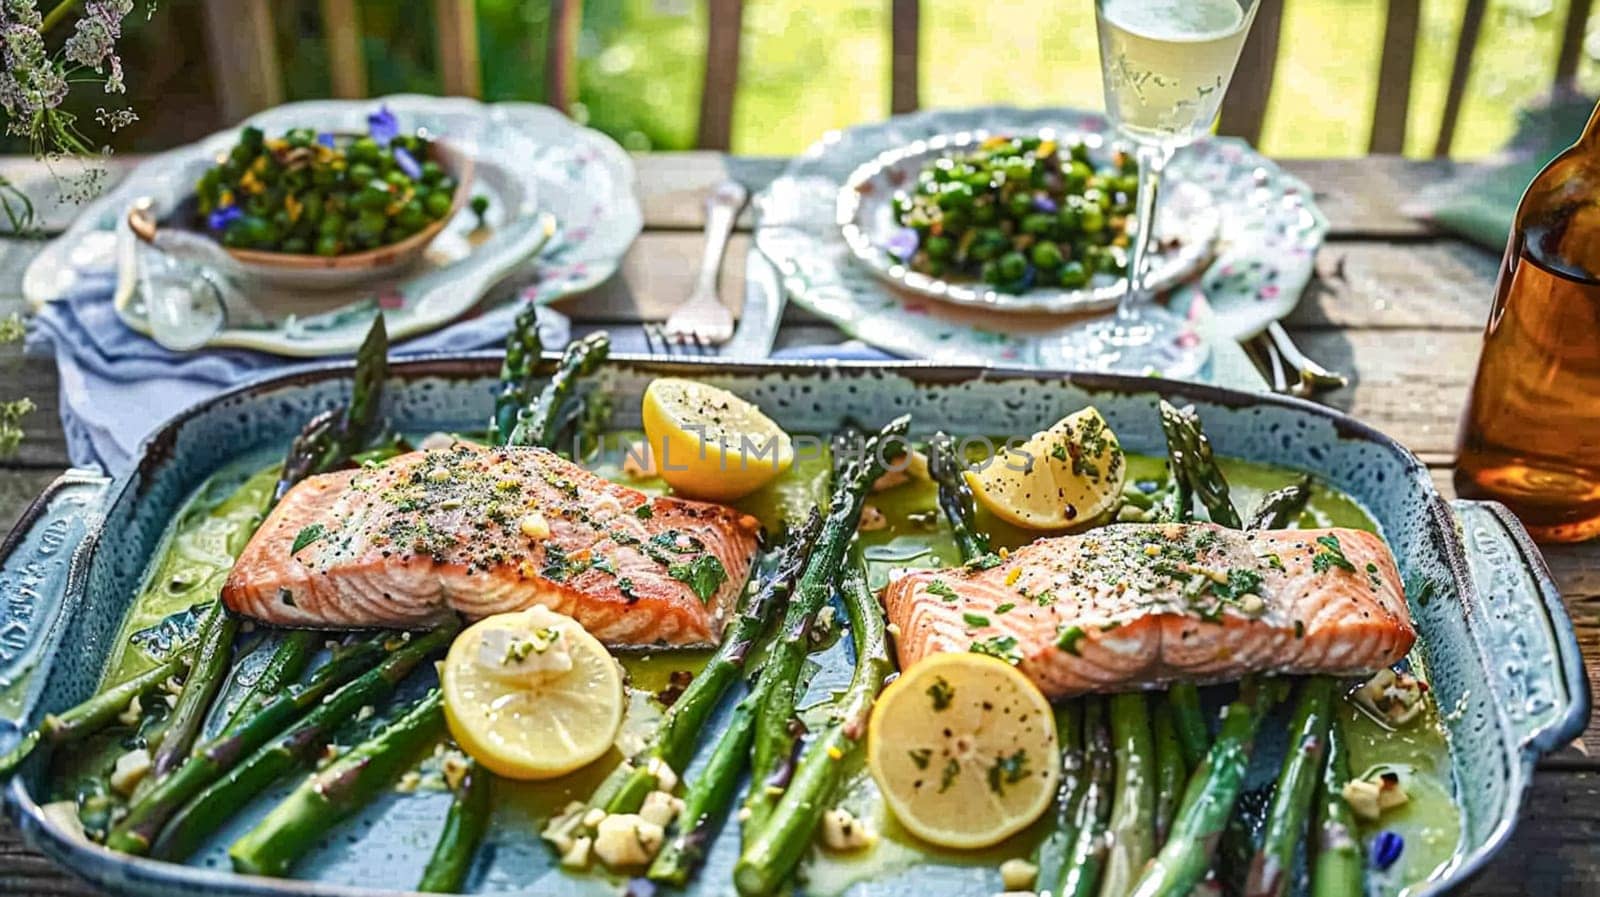 Salmon with asparagus, lemon and spice seasoning in the English countryside garden, homemade recipe by Anneleven